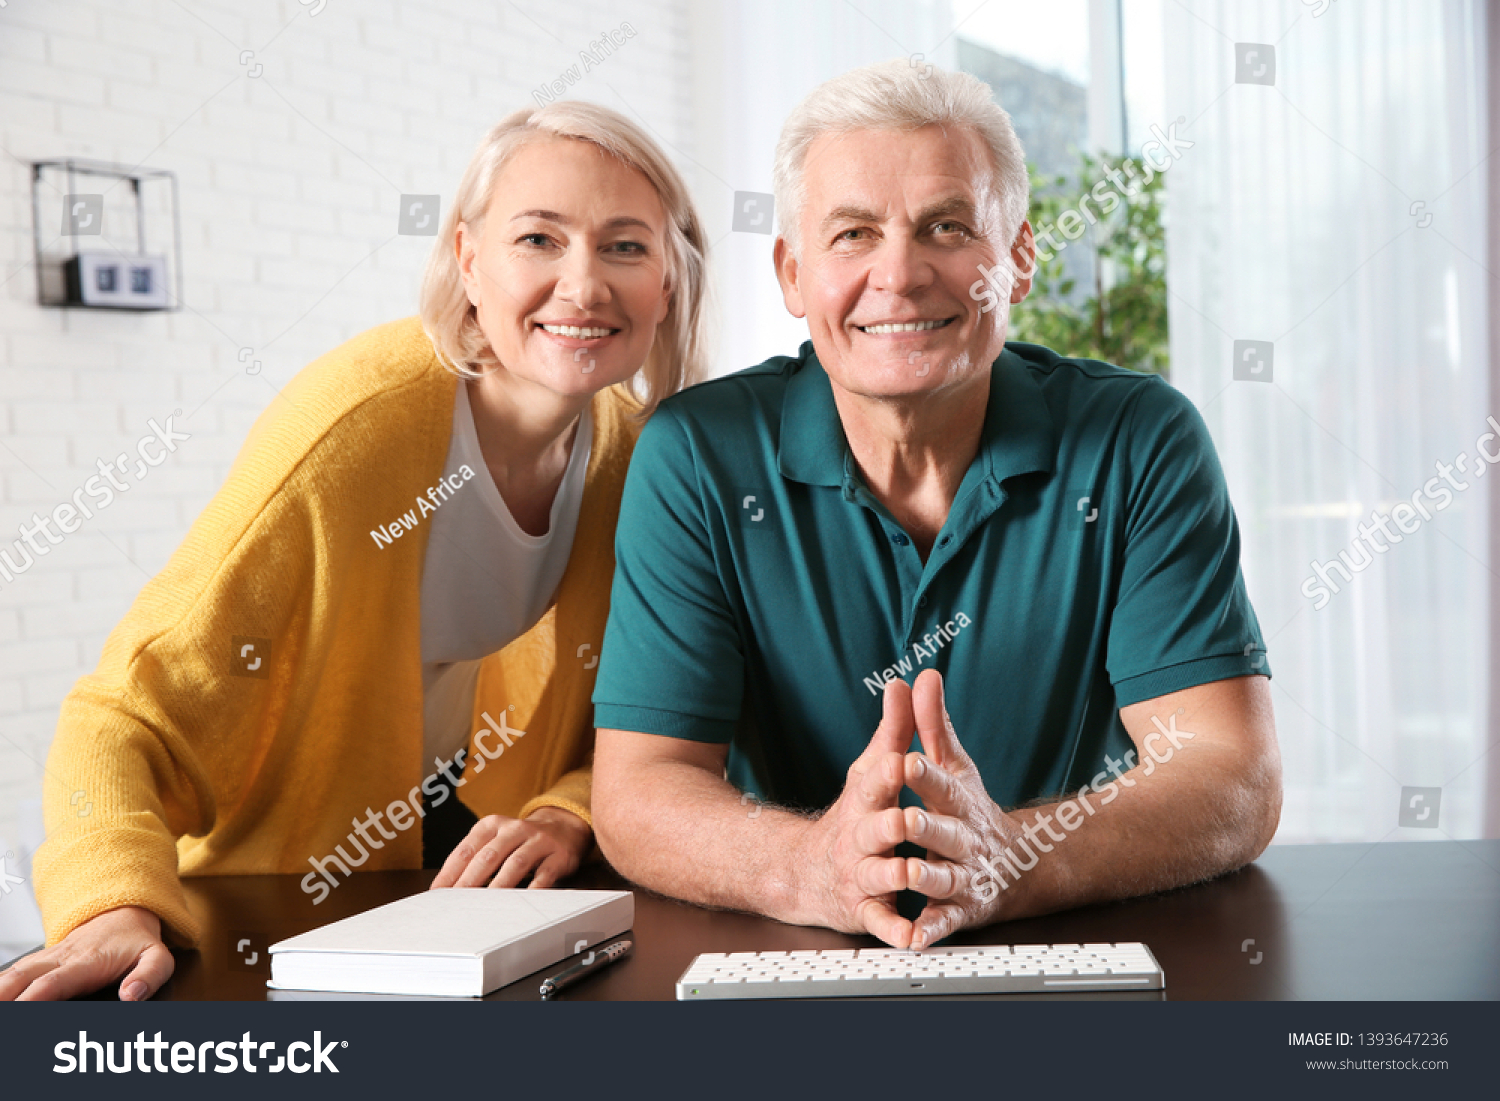 Couple on web chat video